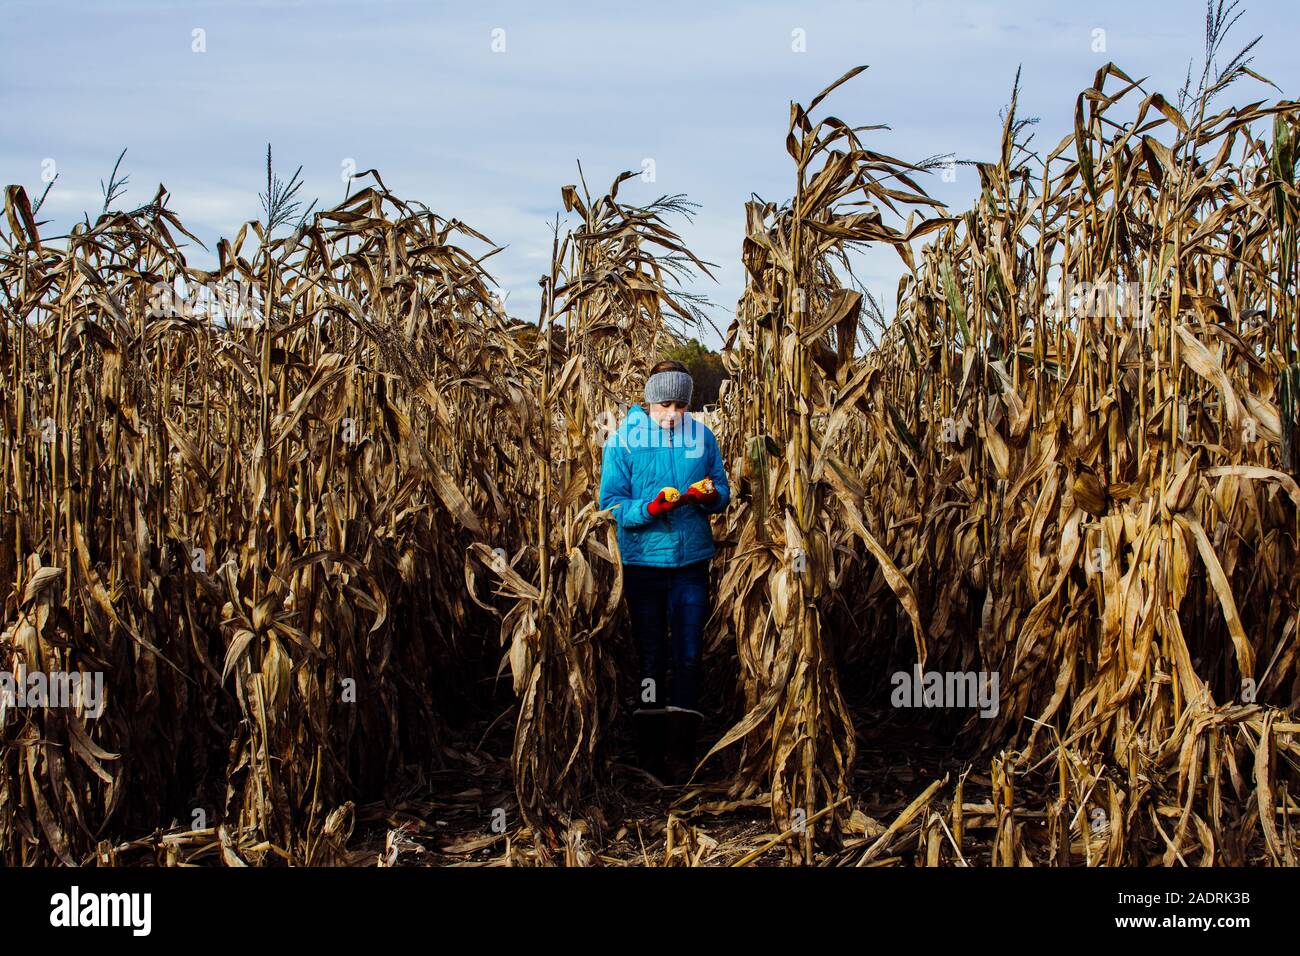 Teen Girl Looking at Two Ears of Field Corn in an Un-harvested Field Stock Photo